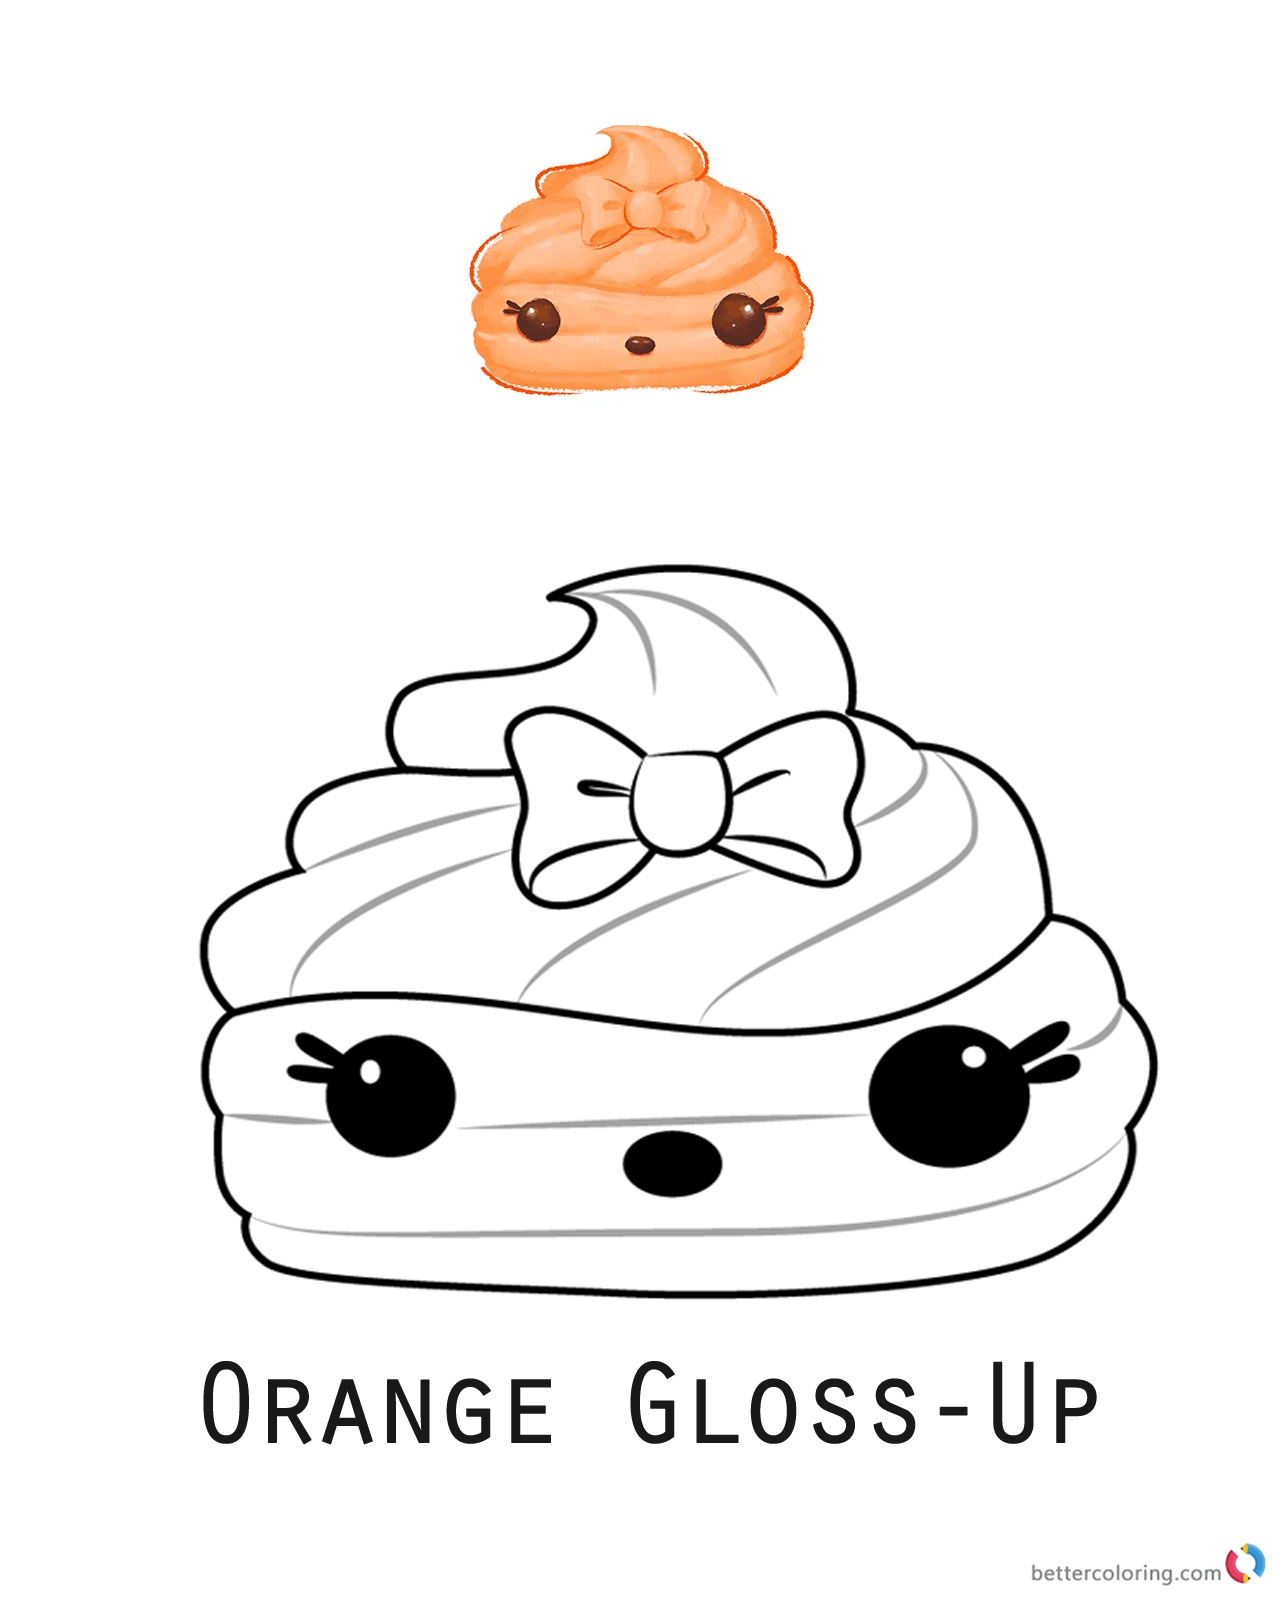 Orange Gloss-Up from Num Noms coloring pages printable